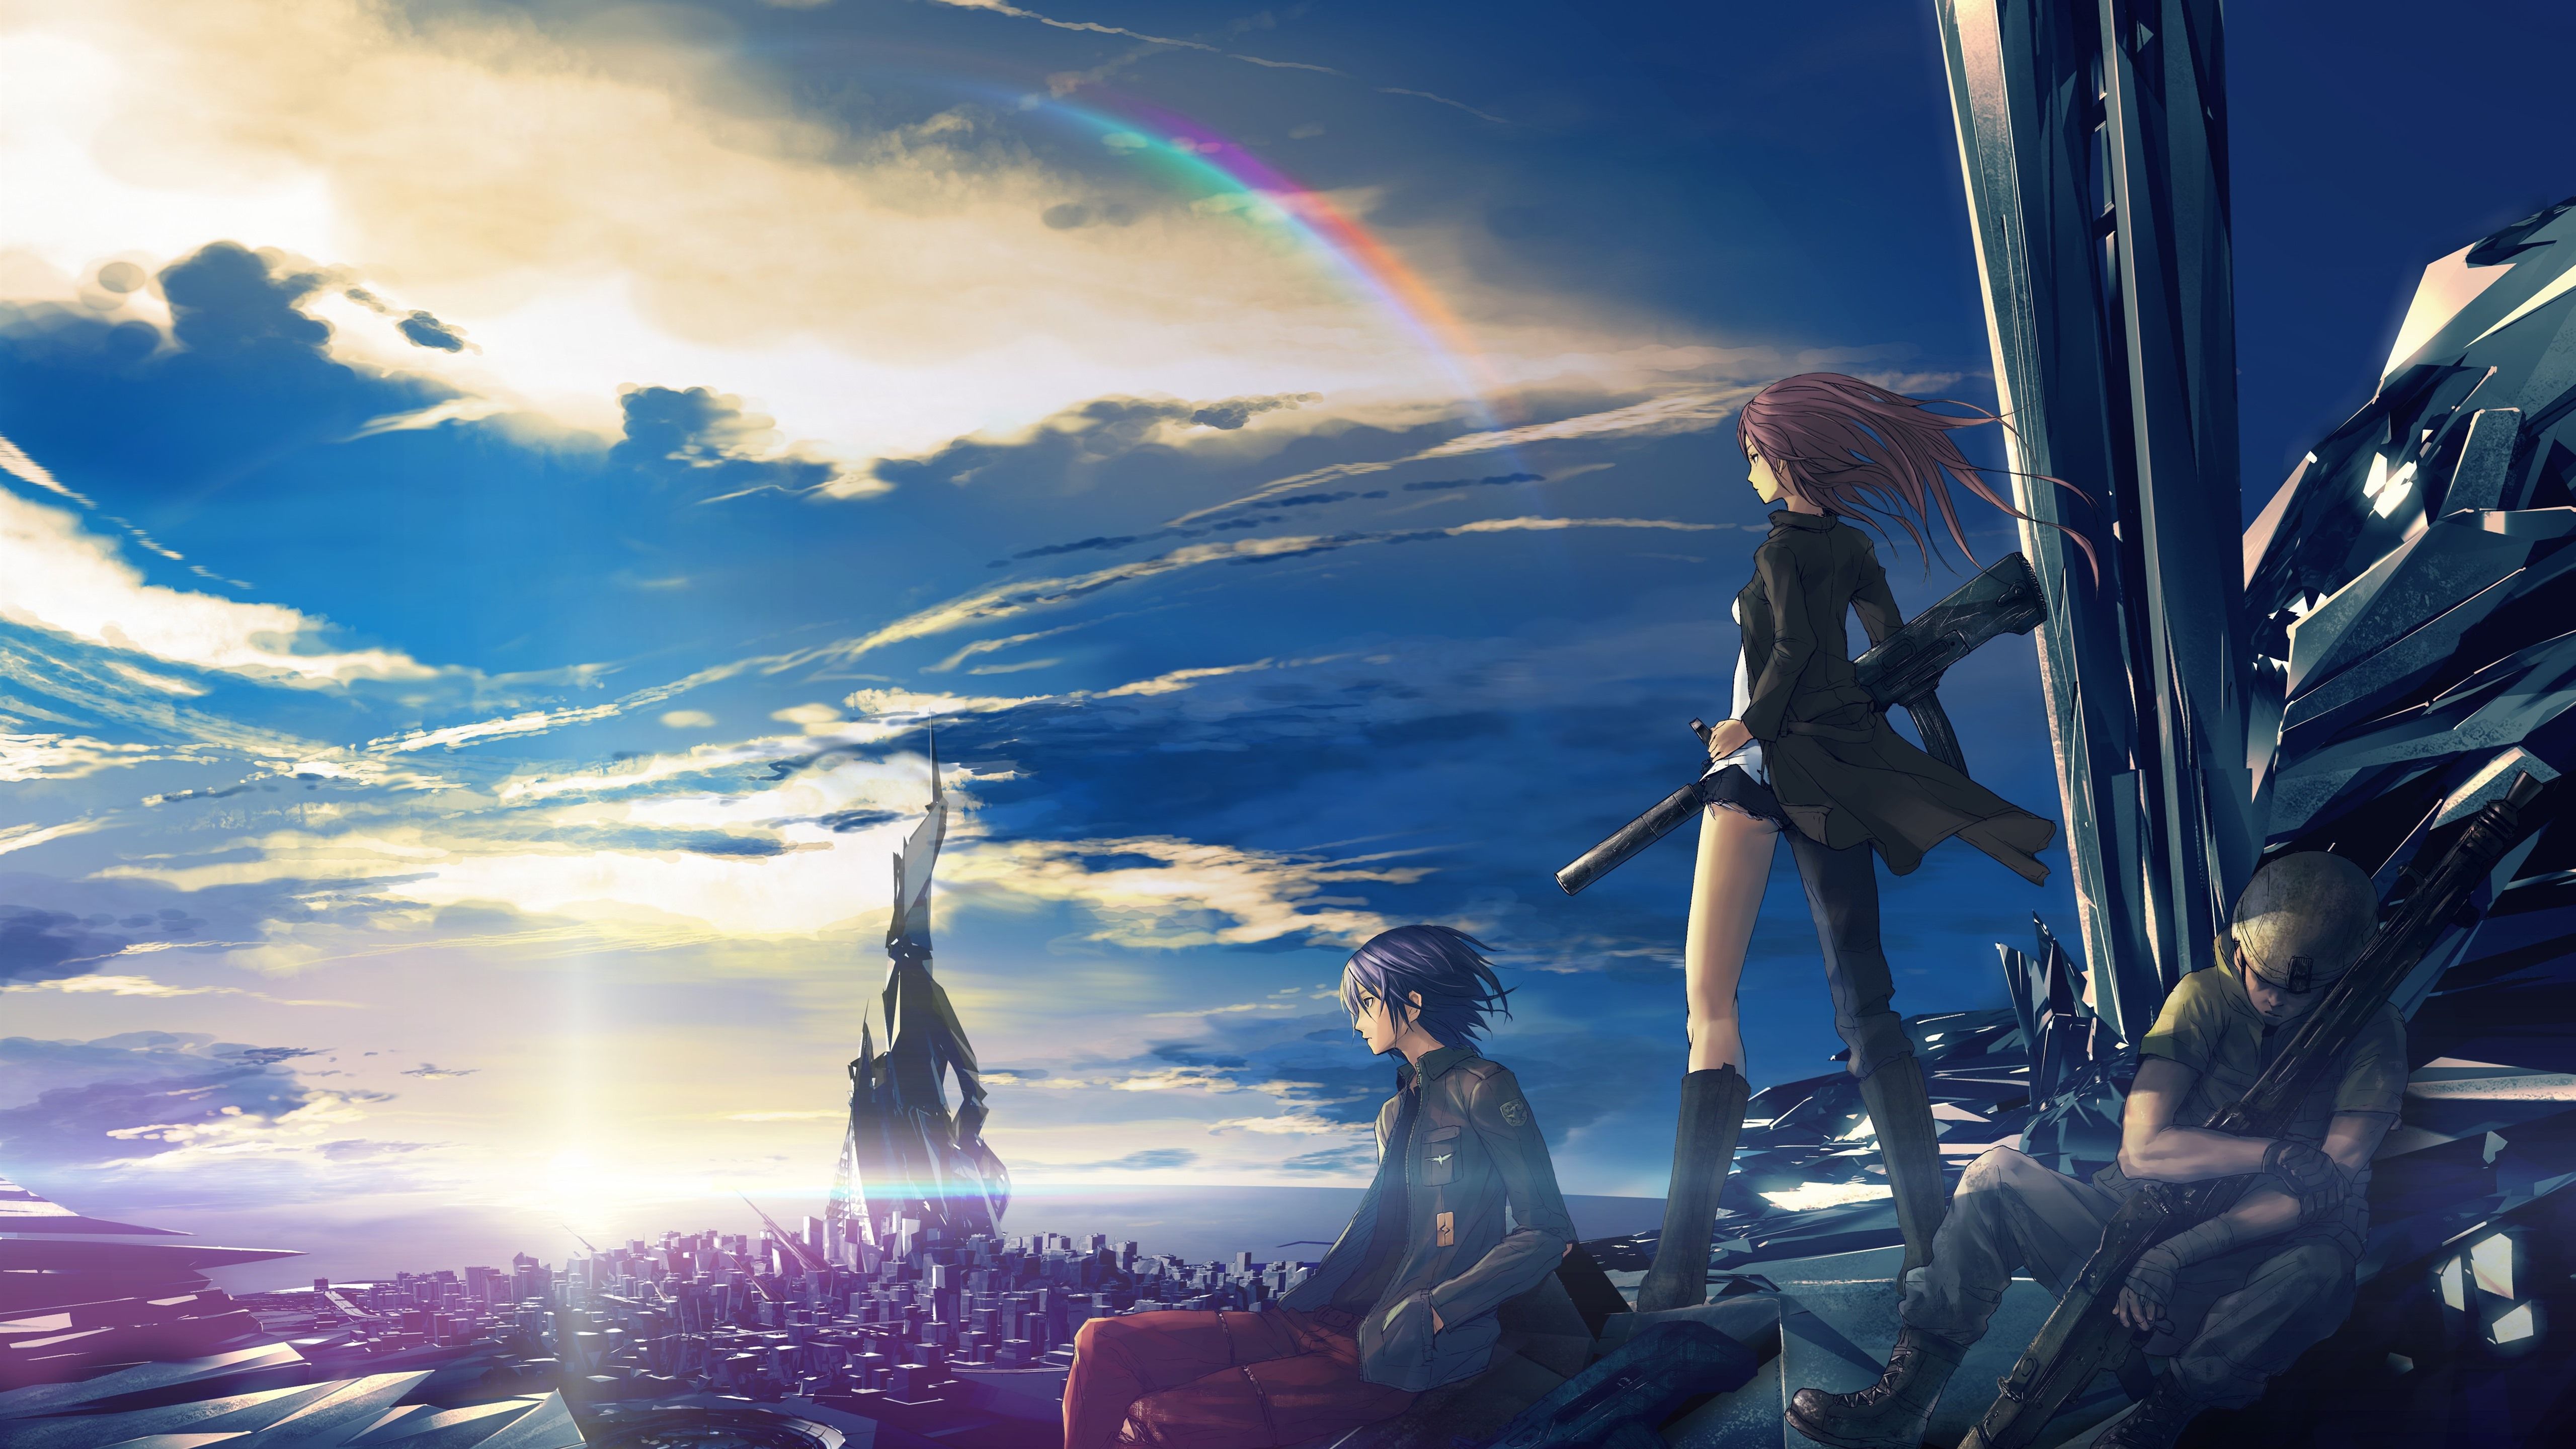 Wallpaper Anime girl and boy, future city, rainbow 5120x2880 UHD 5K Picture, Image